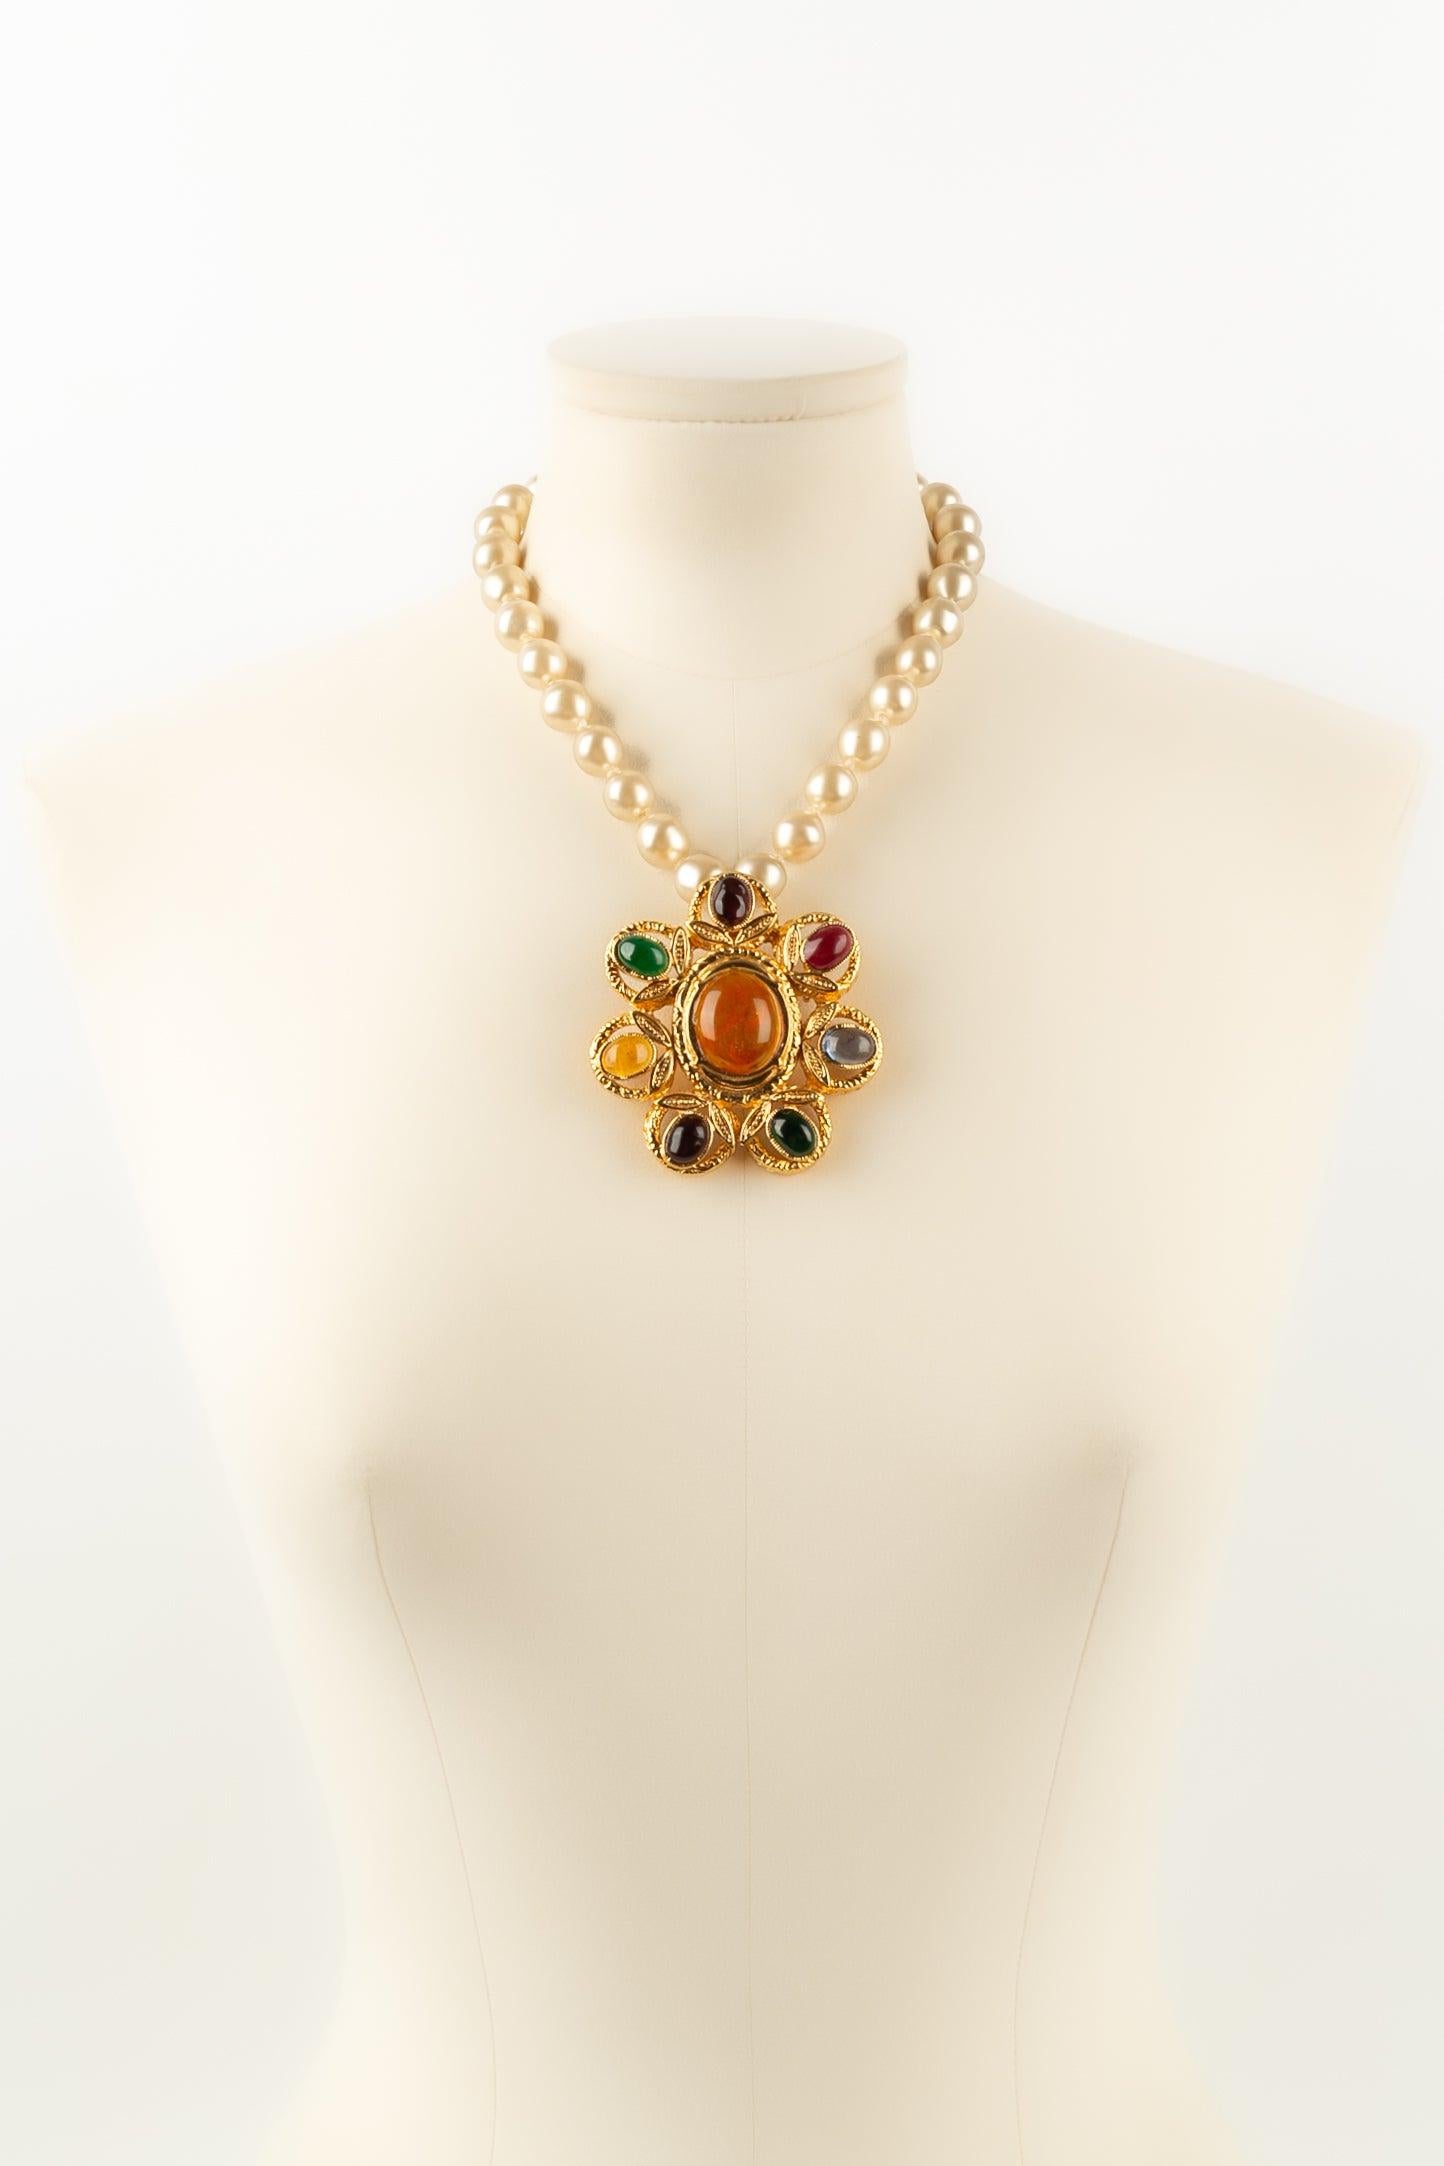 Chanel Necklace in Pearly Beads with A Medallion, 1996 For Sale 3